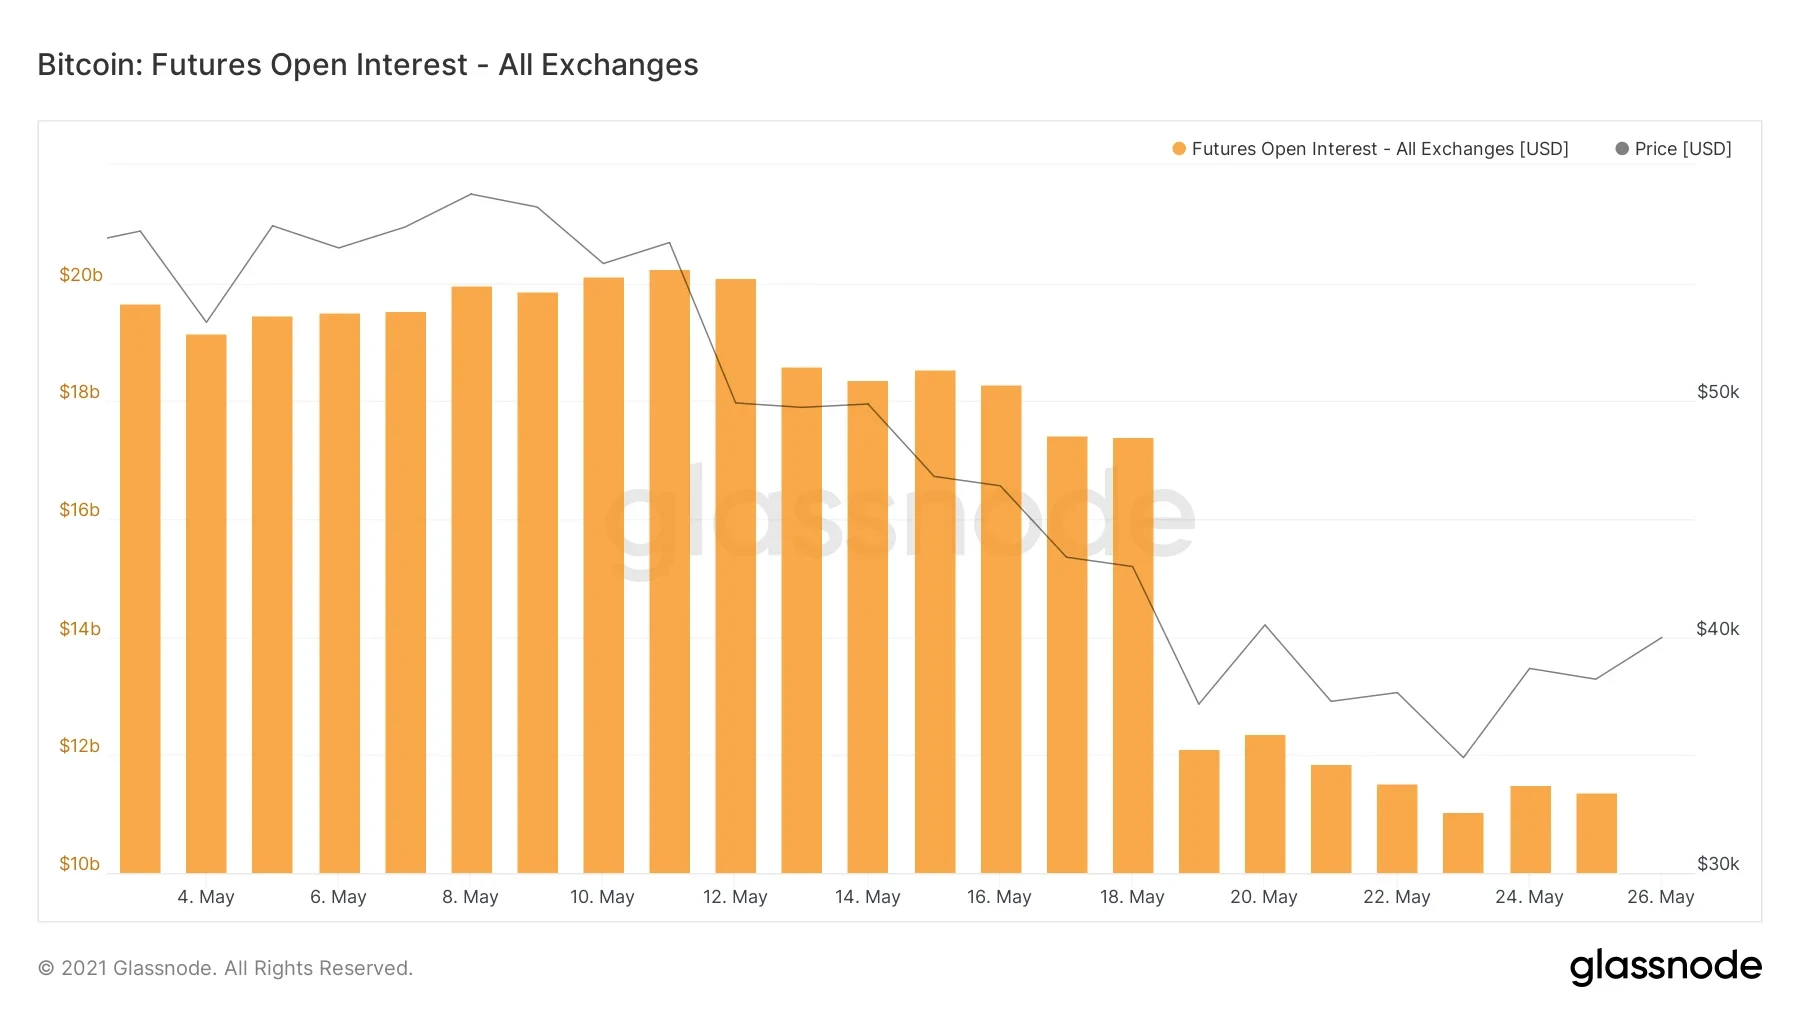 Bitcoin: Futures Open Interest - All Exchanges